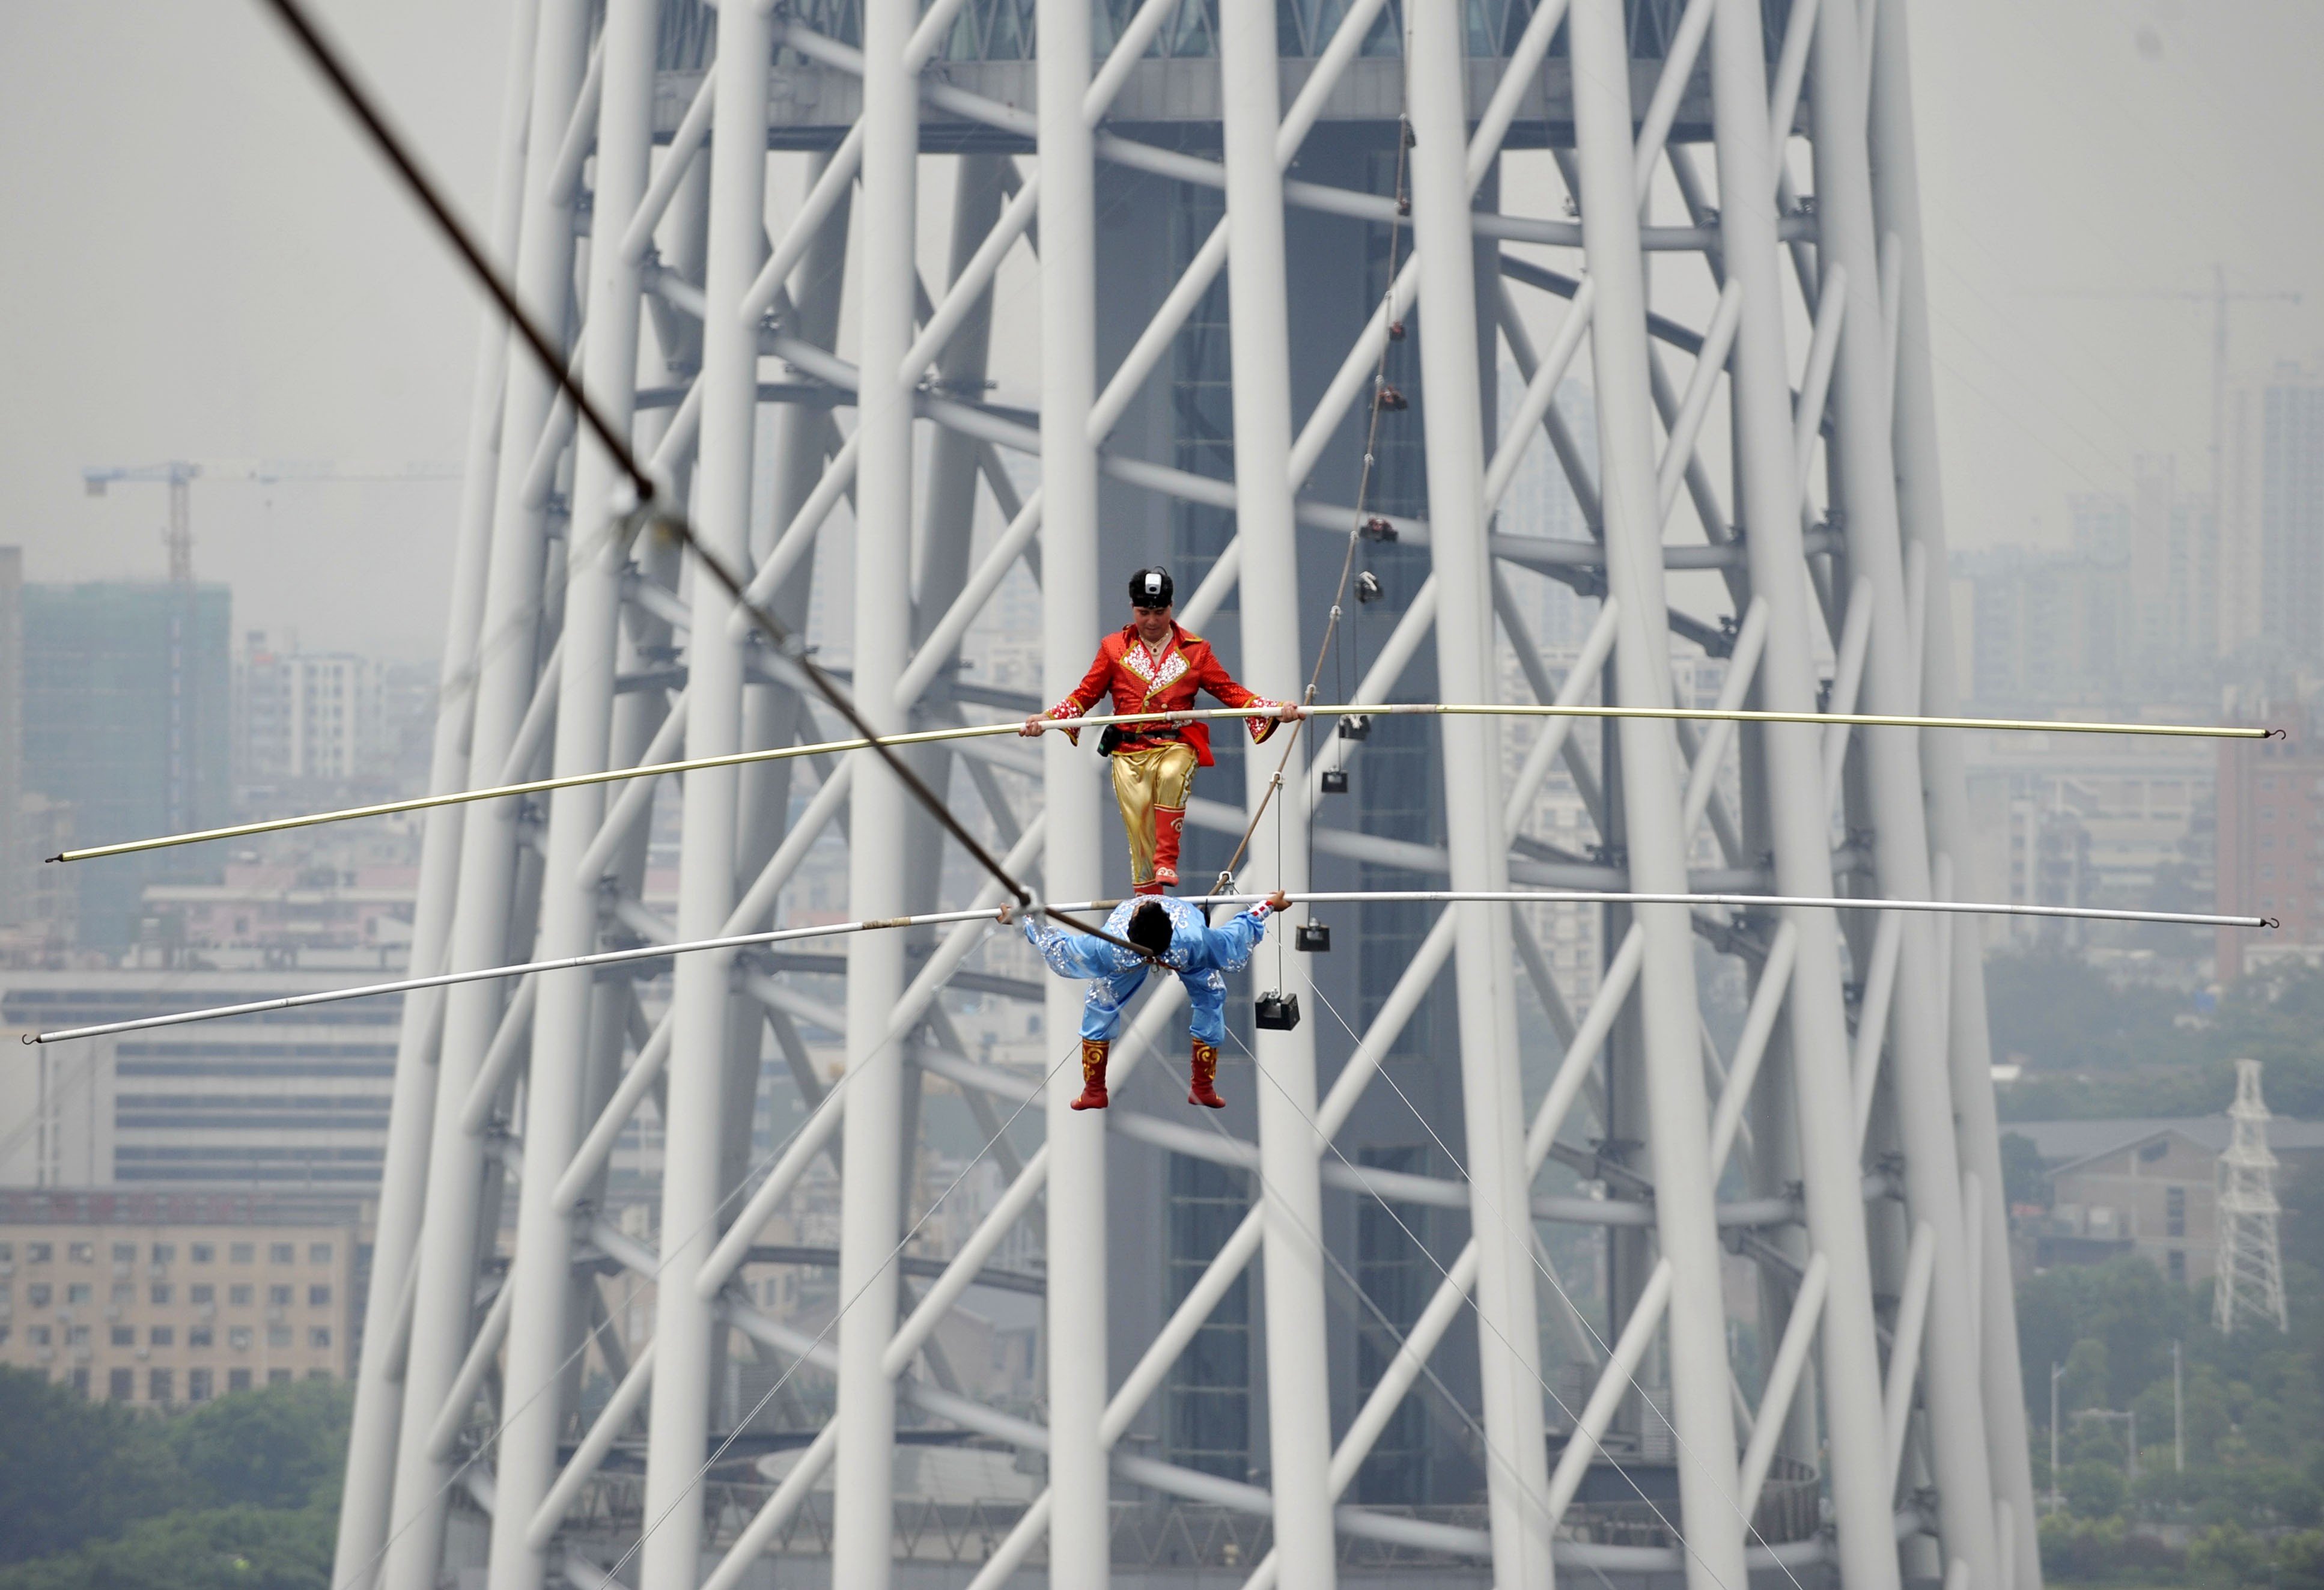 This feat by tightrope walkers 100m above the Pearl River in Guangzhou is nothing compared to the difficult balancing act China needs to achieve between political centralisation and economic decentralisation. Photo: Xinhua